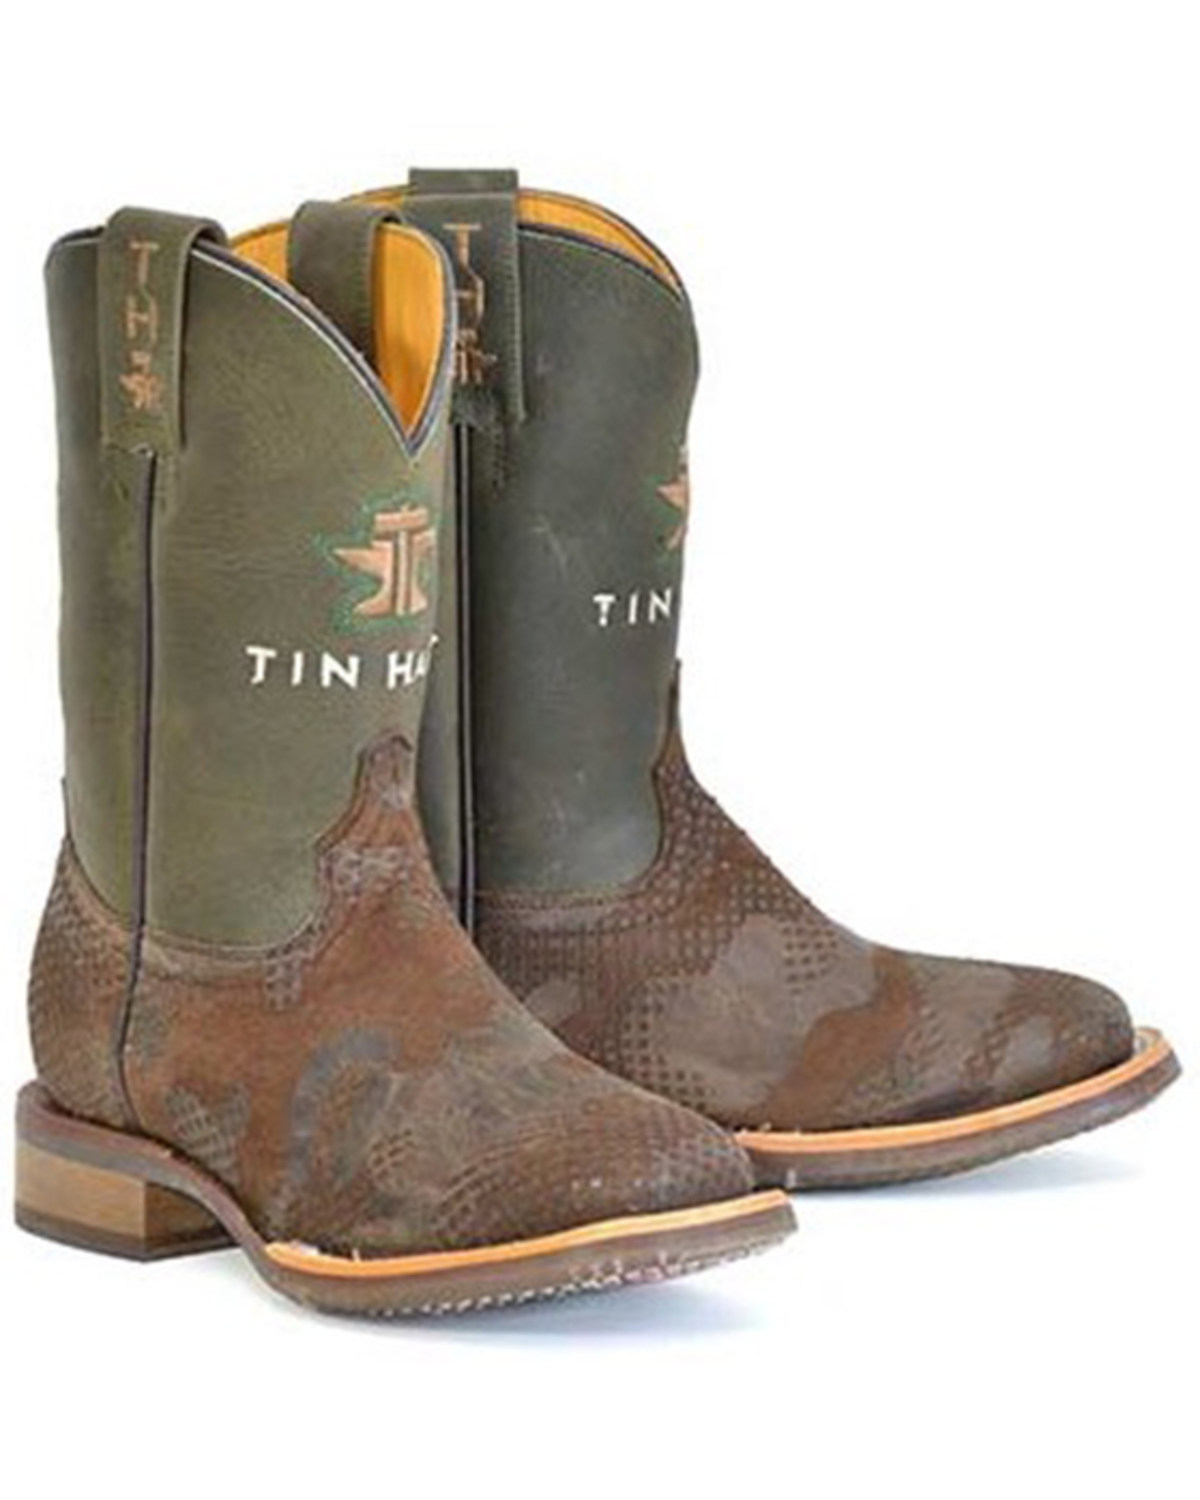 Tin Haul Boys' Stealth Western Boots - Broad Square Toe